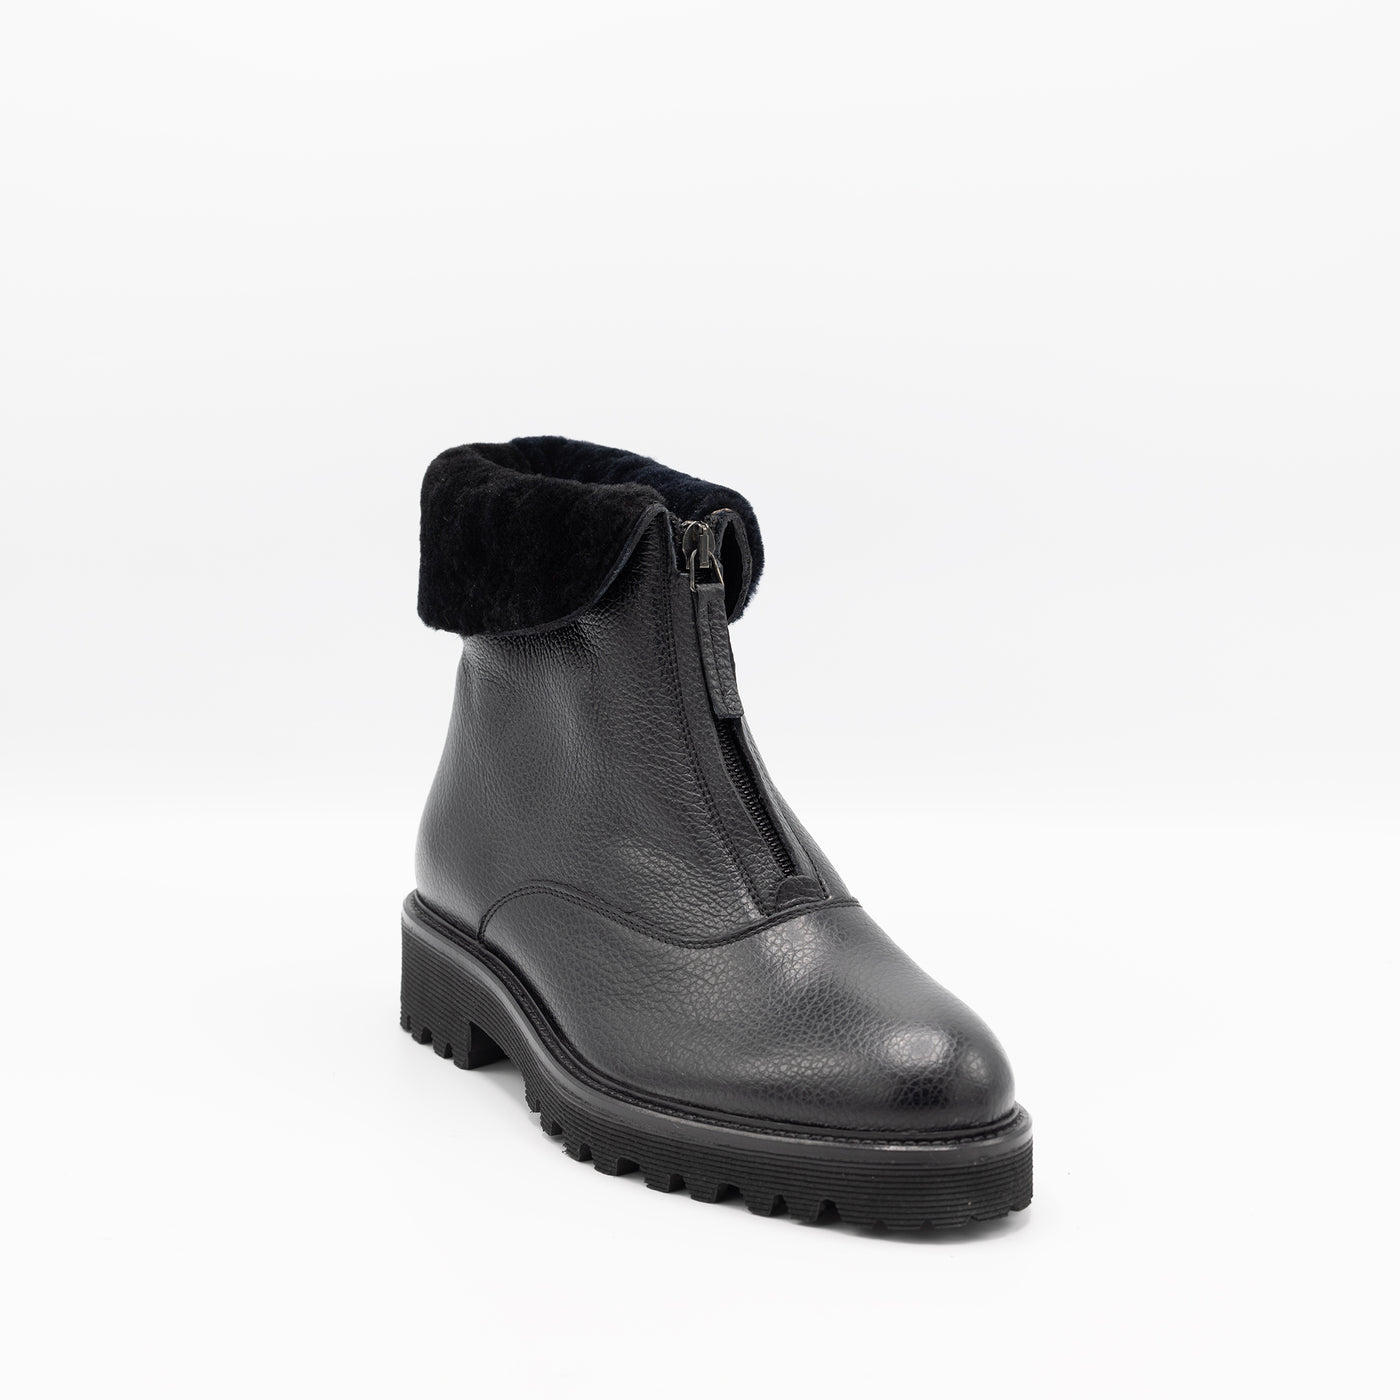 Zip Up Shearling Boots in Grained Leather